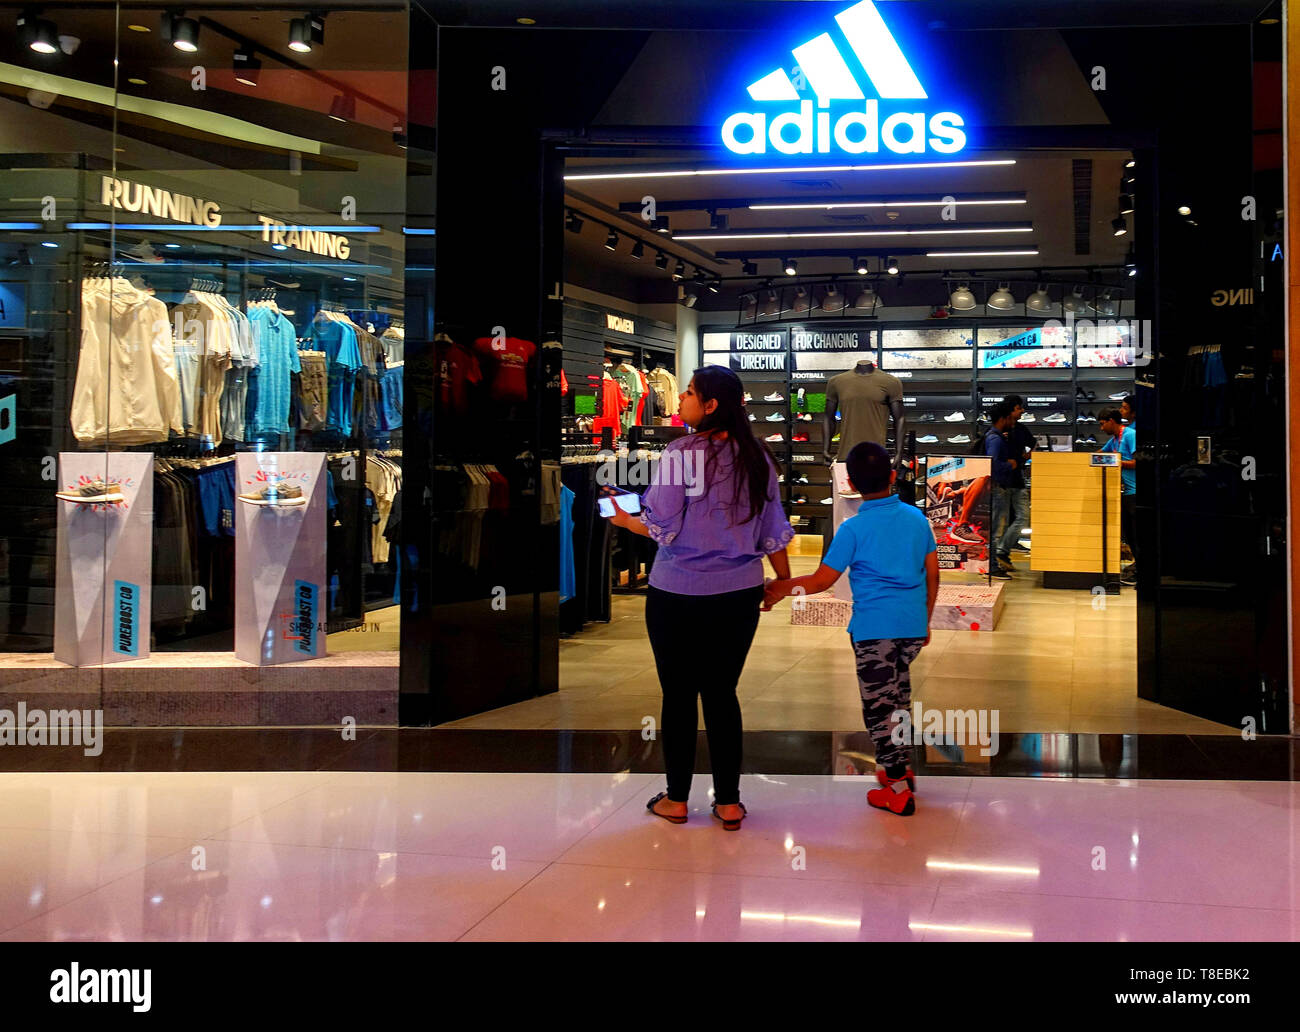 adidas in city centre